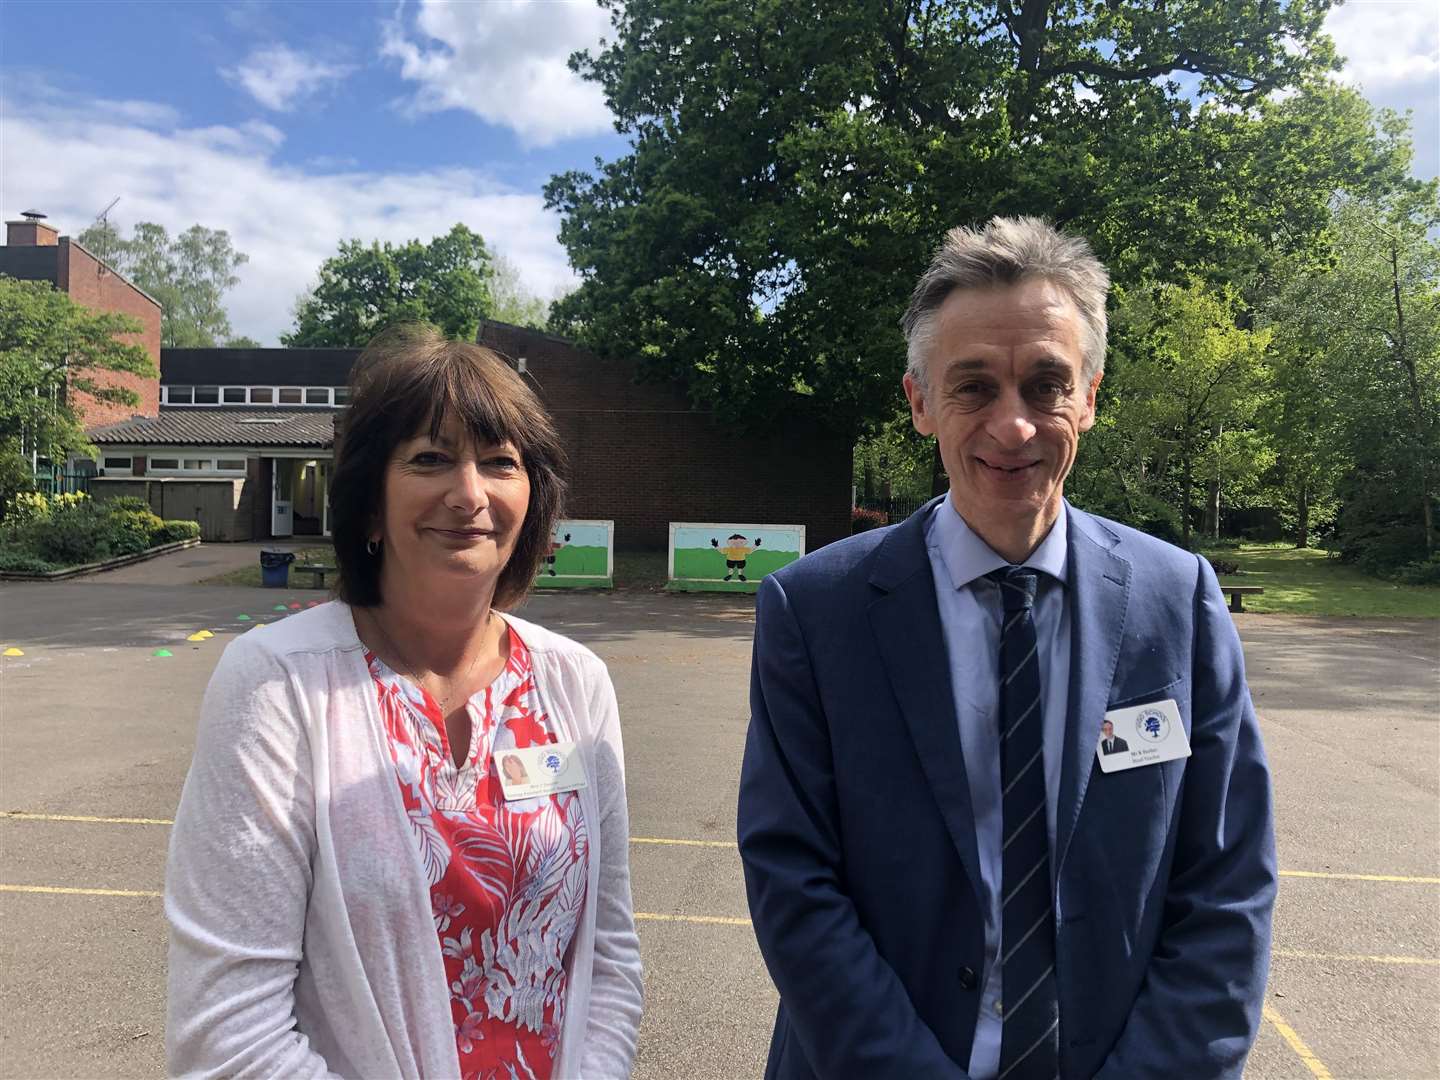 From left: Teaching assistant Jenny Dawson and headteacher Roger Barber